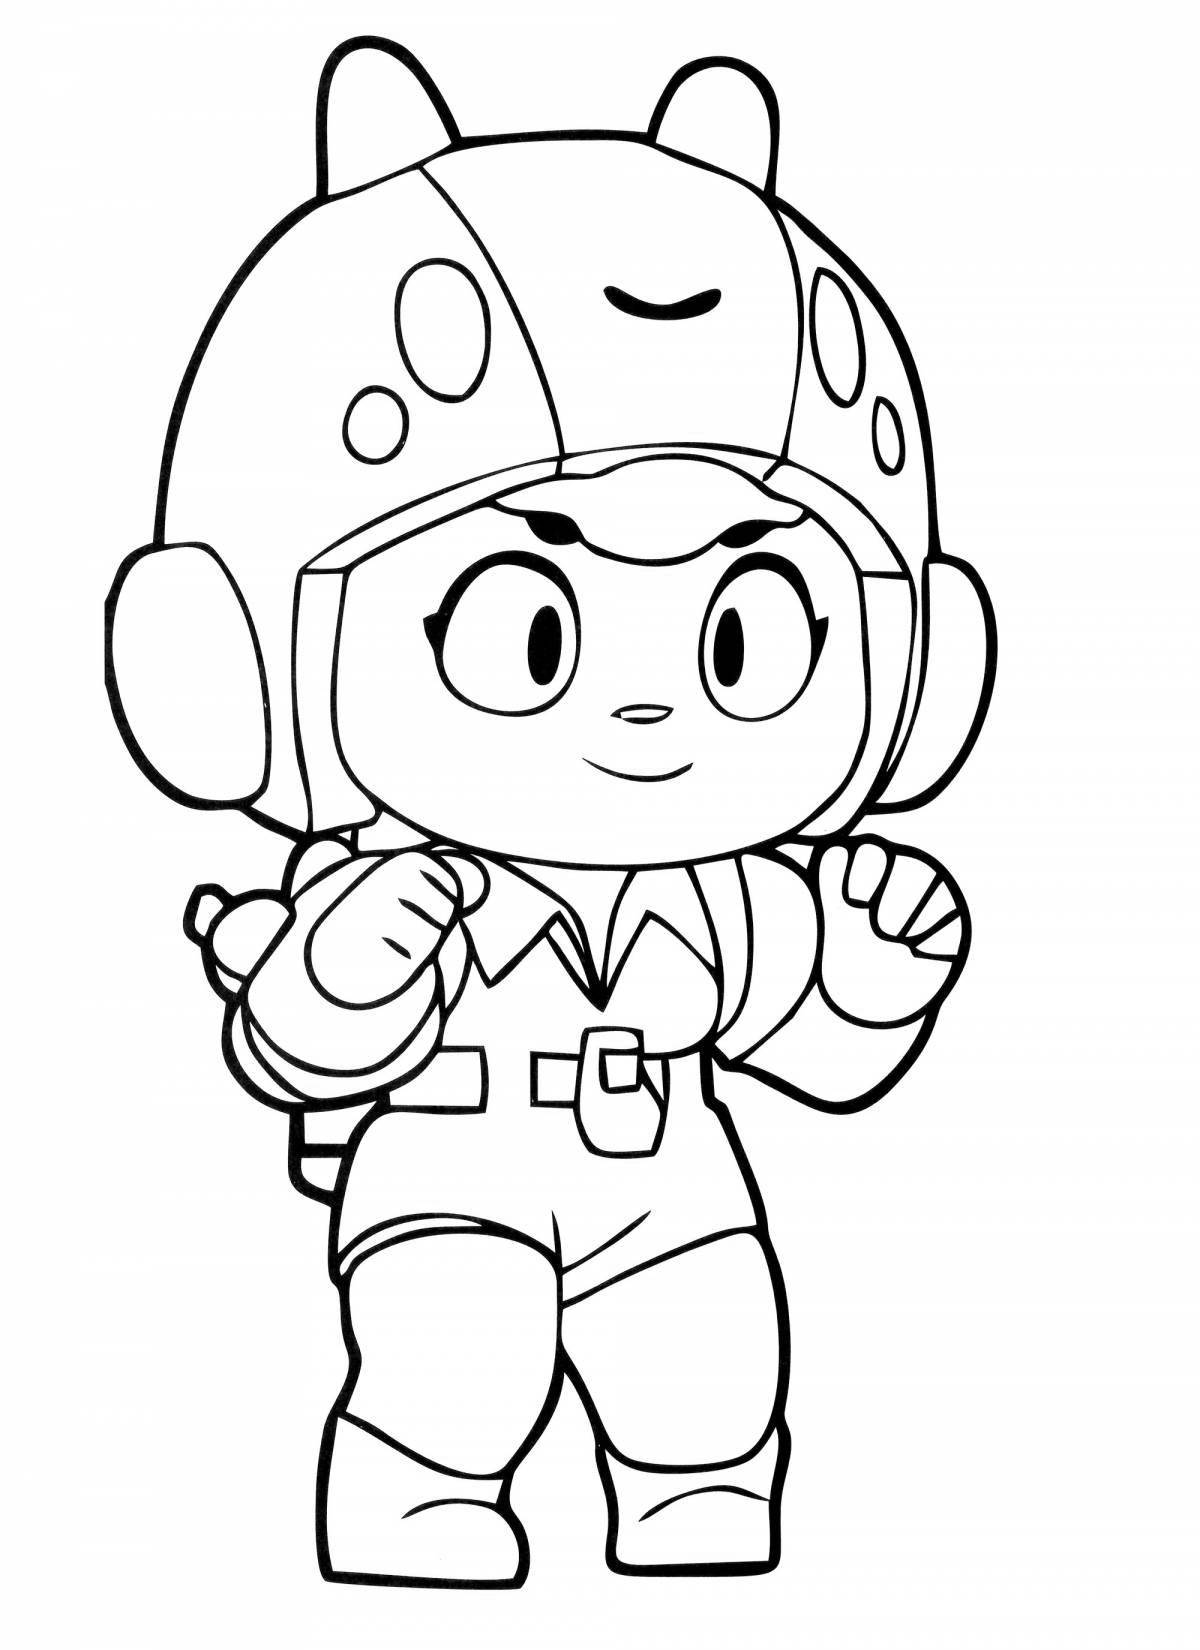 Shelly's amazing brawl stars coloring book